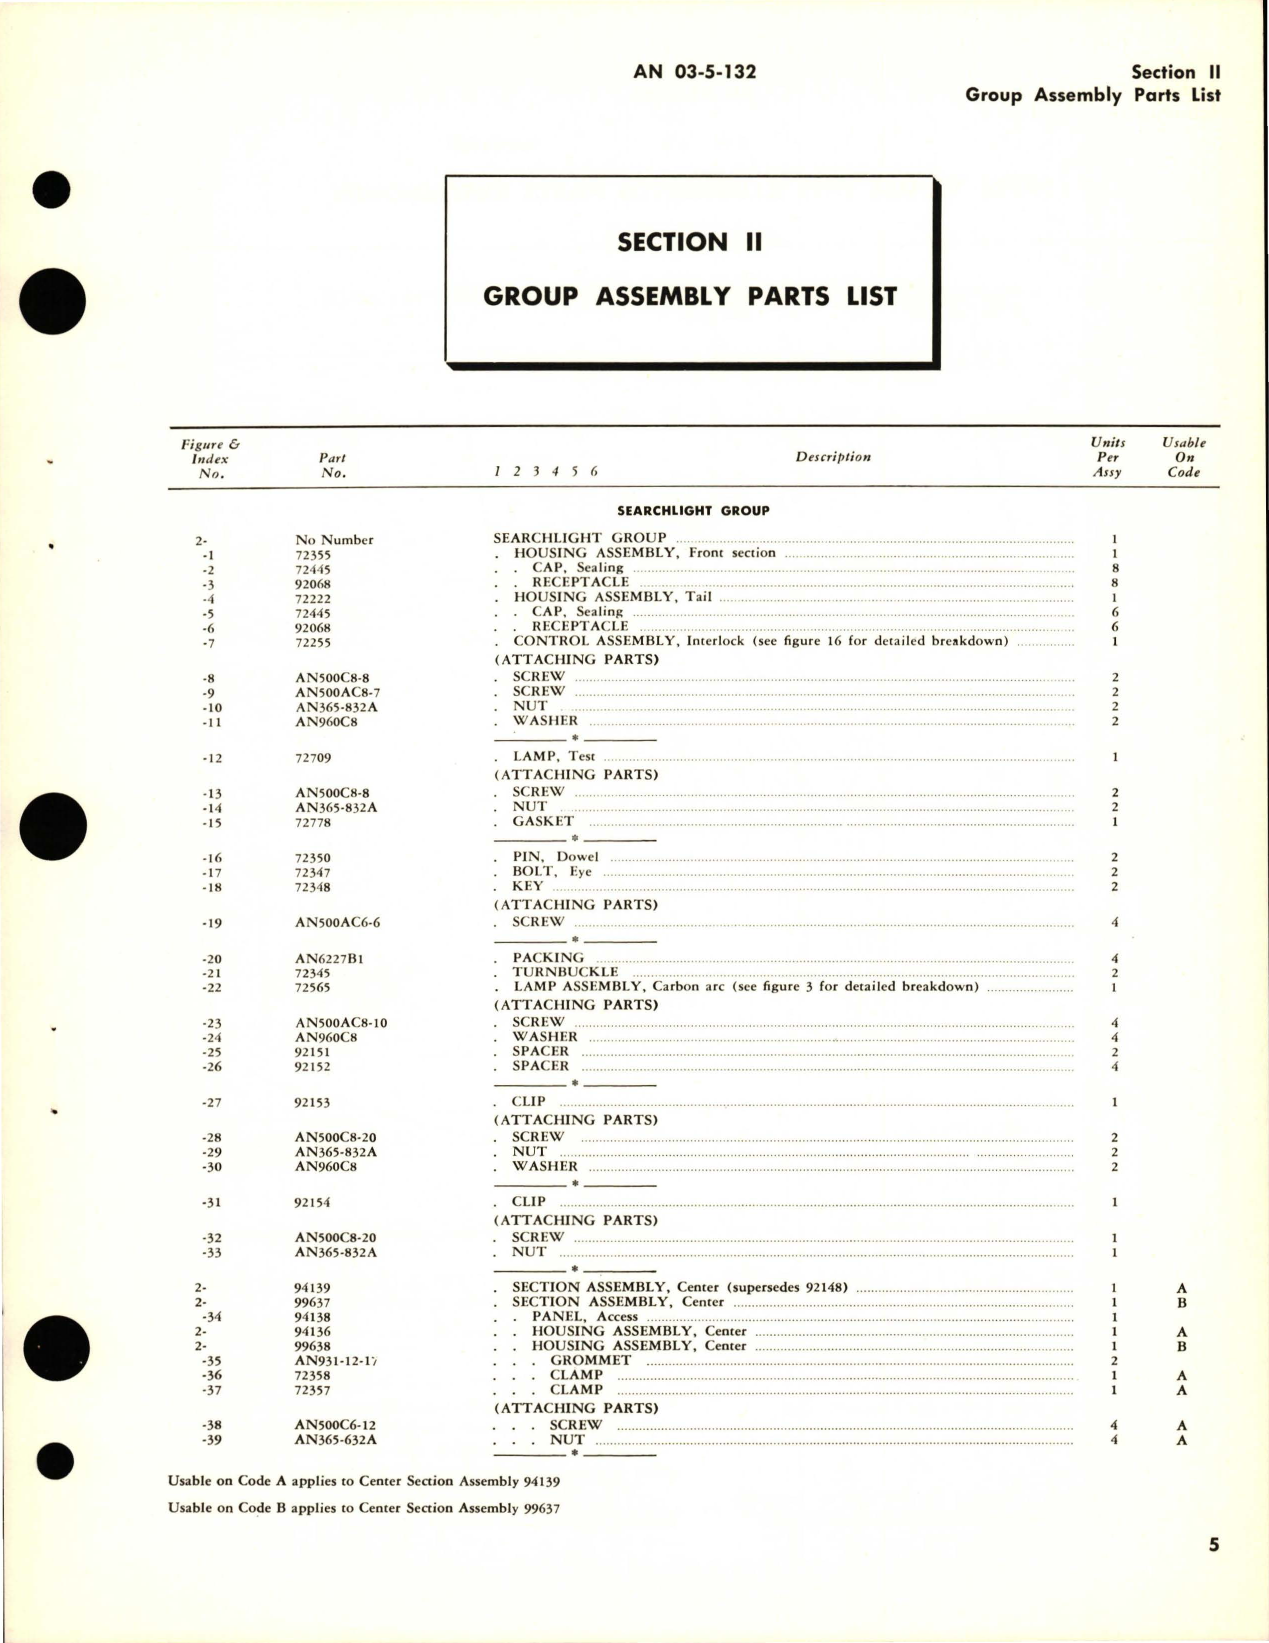 Sample page 9 from AirCorps Library document: Illustrated Parts Breakdown for Searchlight Sets - Installation In Aircraft and Sets Equipped with Obturator Probe - AN-AVQ-2 and AN-AVQ-2A 